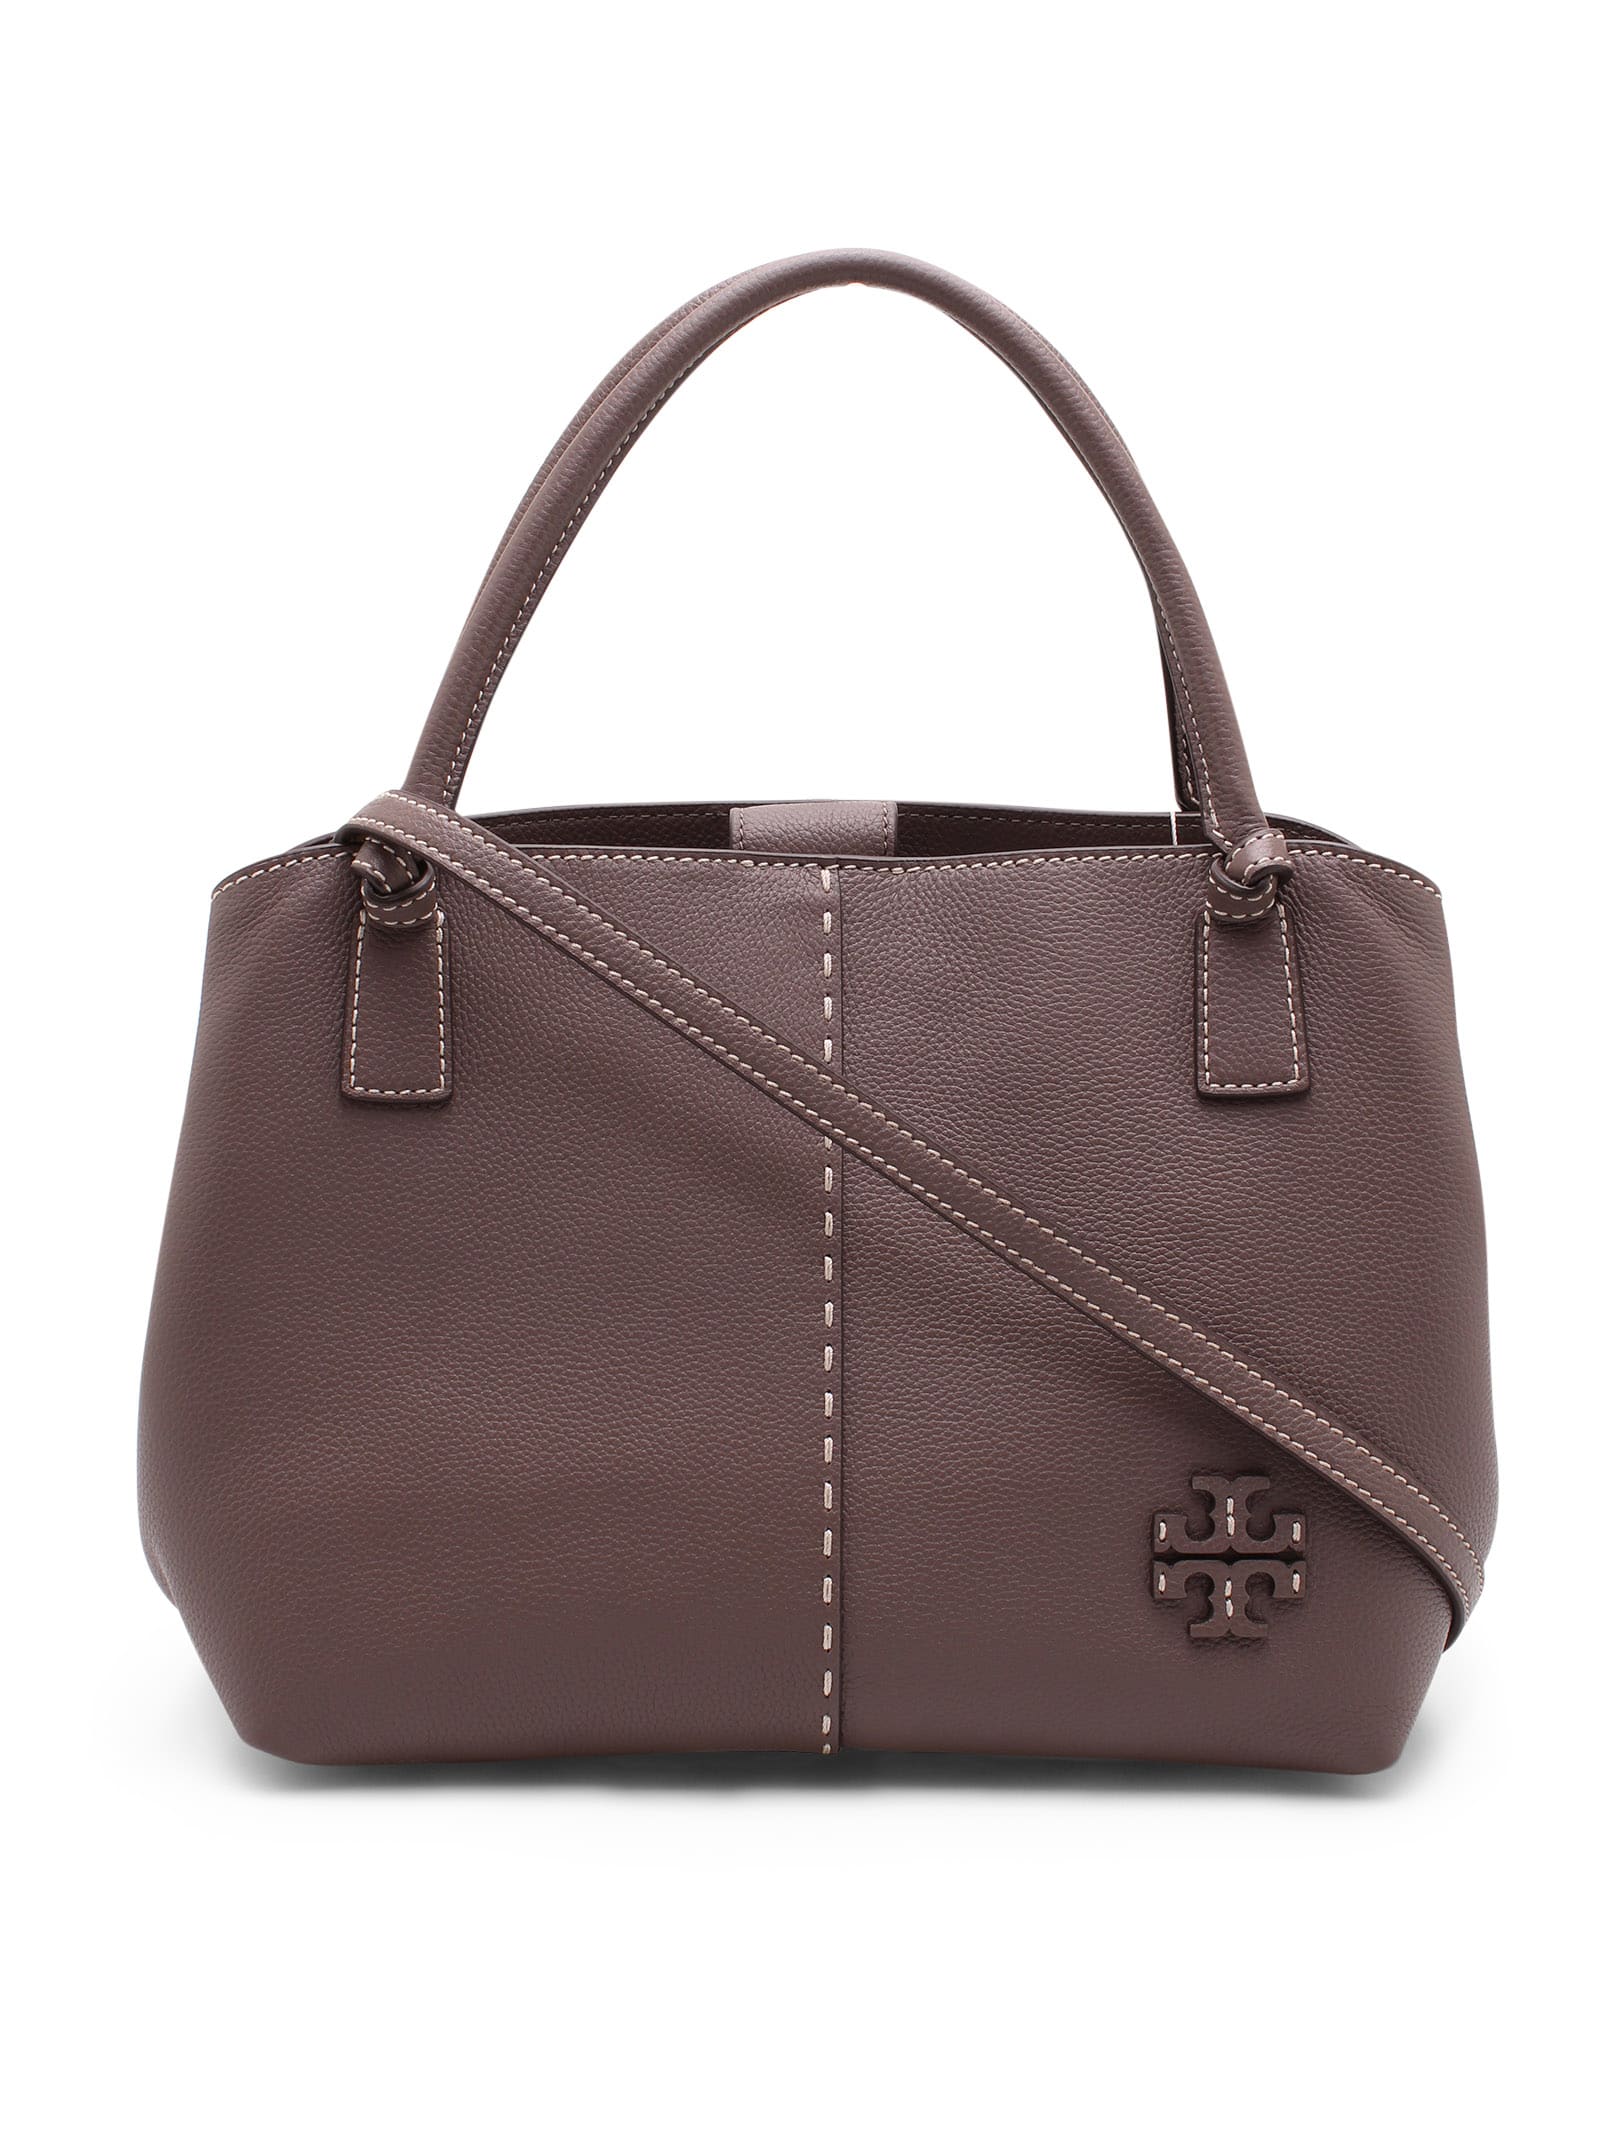 Tory Burch mcgraw Leather Tote Bag